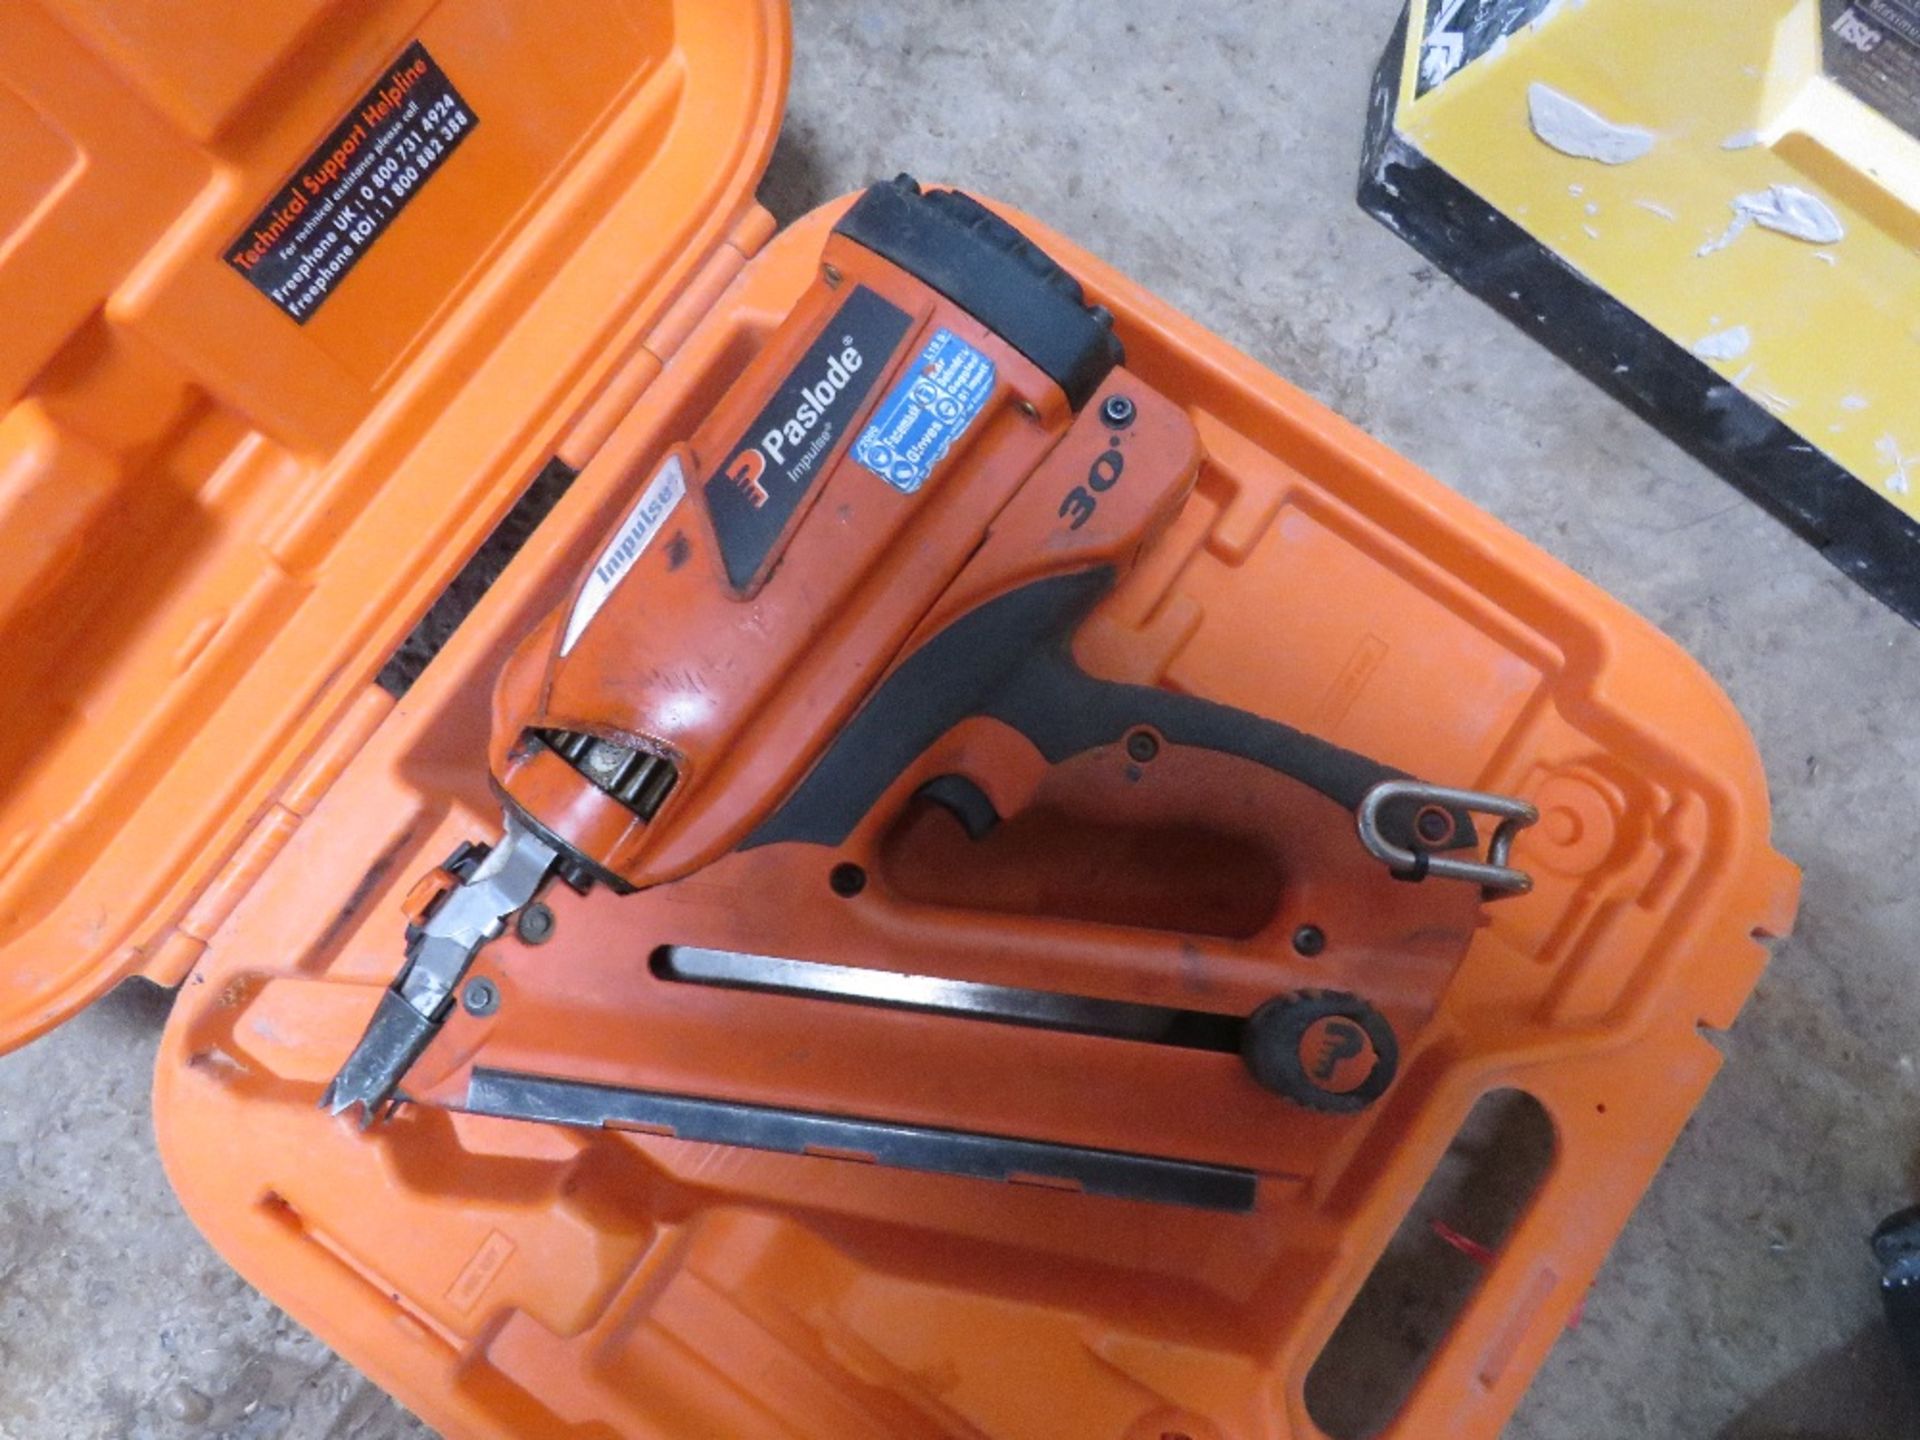 PASLODE NAIL GUN IN A CASE, NO CHARGER OR BATTERY. - Image 2 of 3